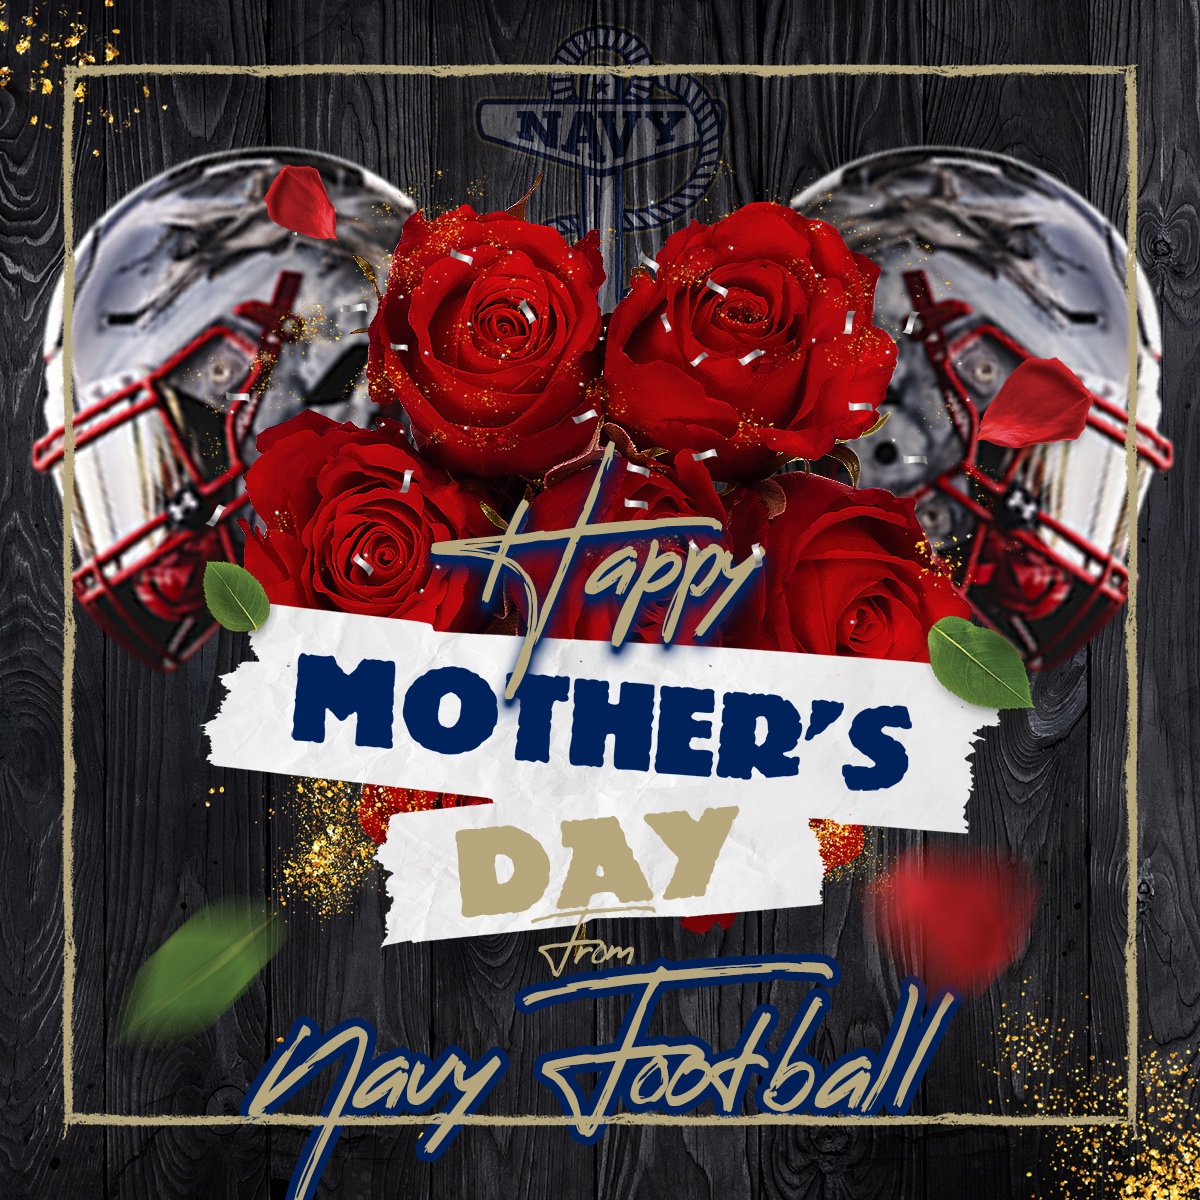 Happy Mother's Day from Our Brotherhood to your family! #GoNavy | #TheAcademy